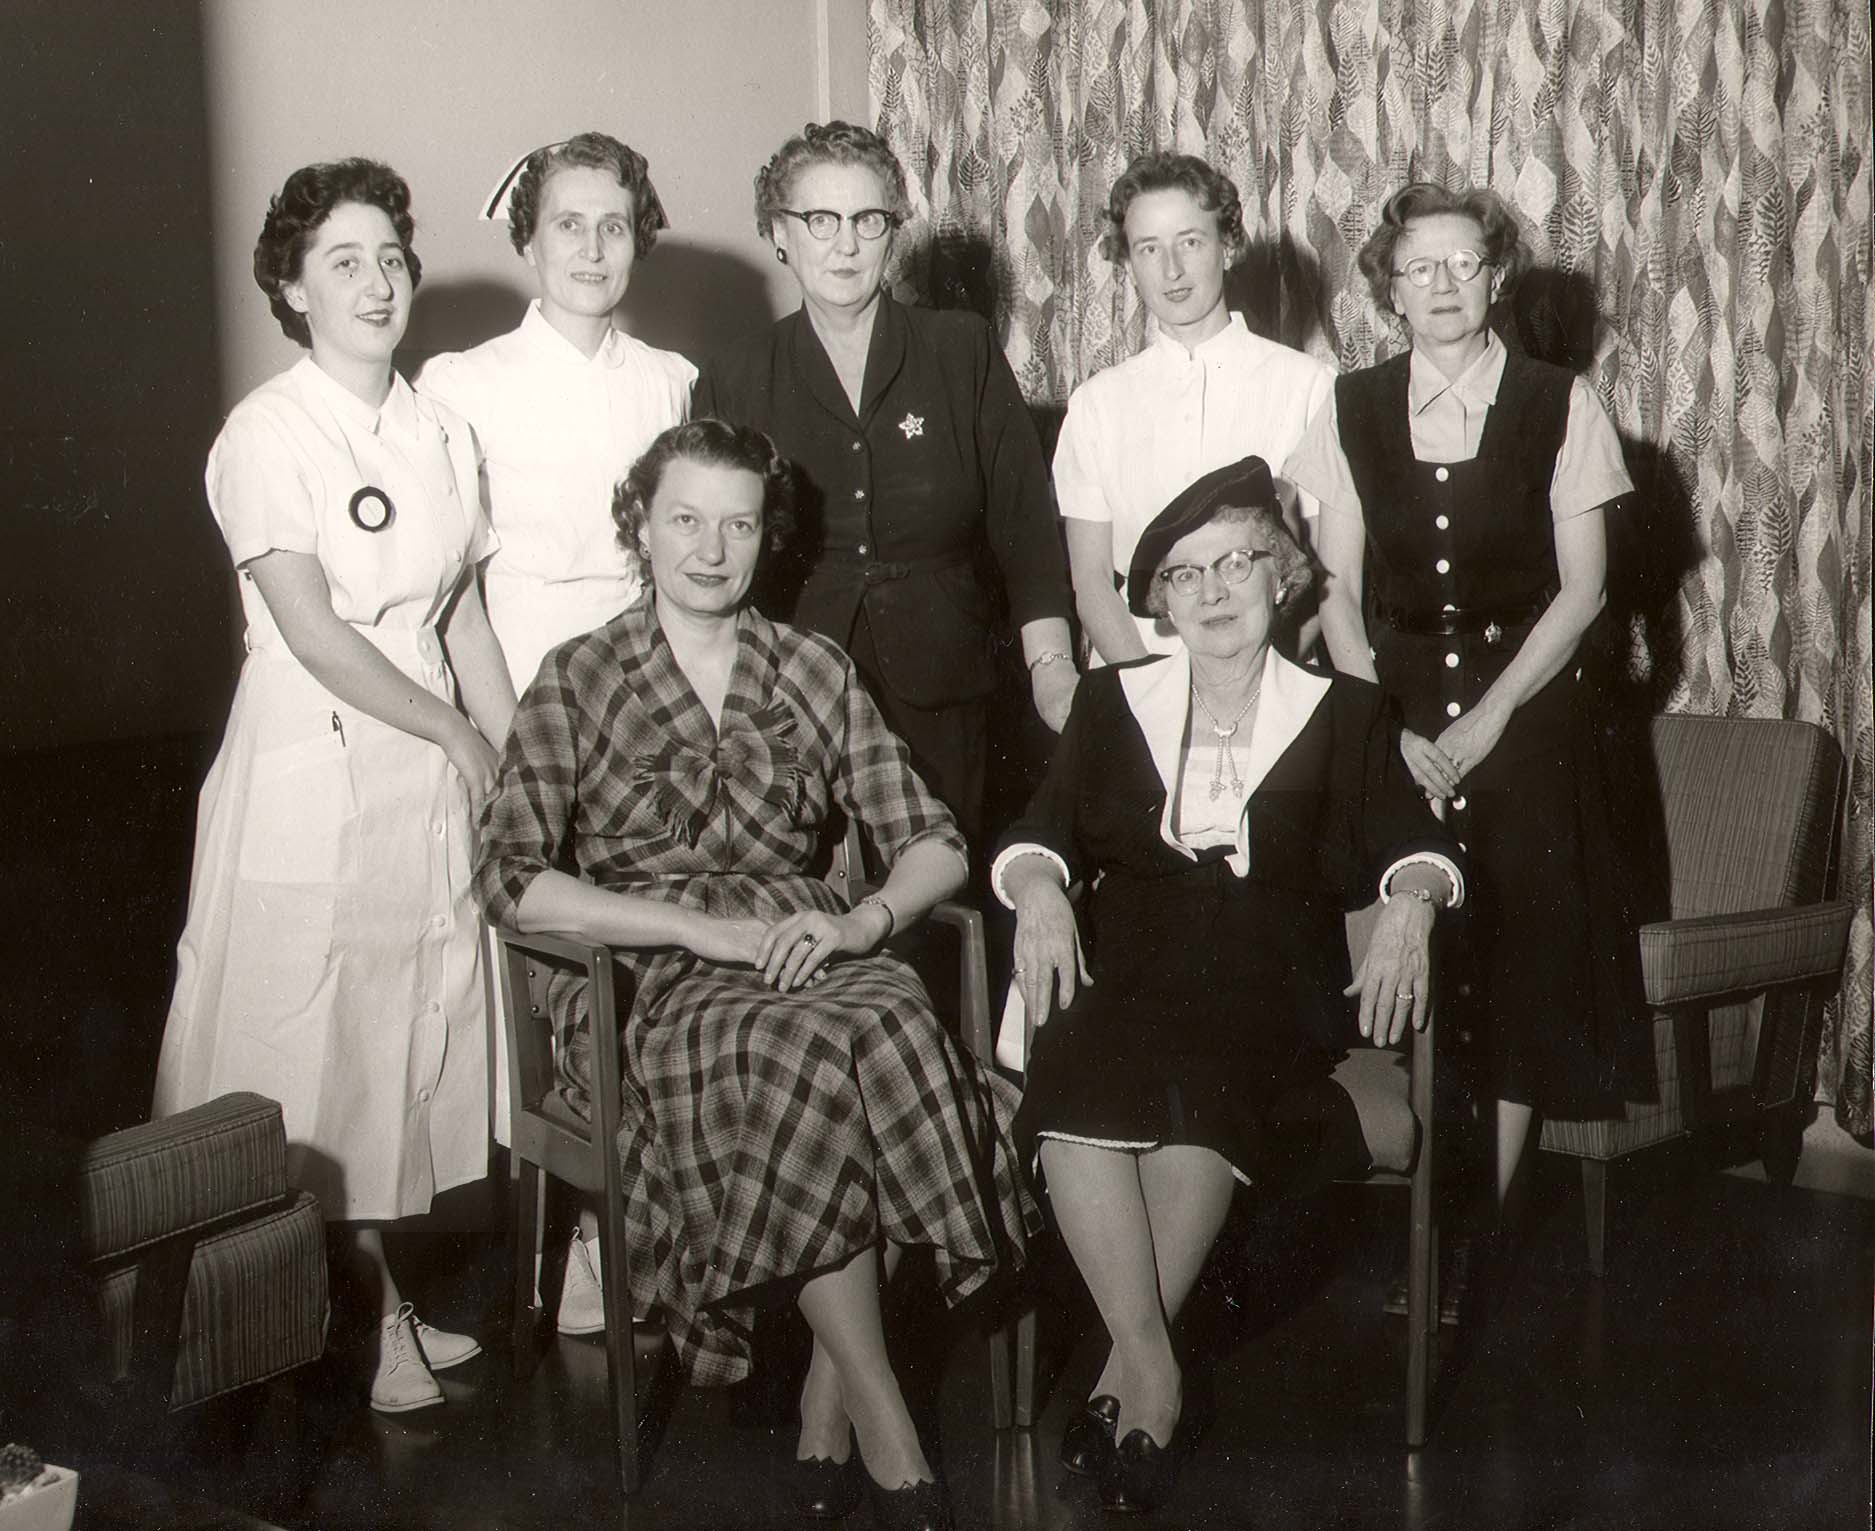 A black and white photo of seven ladies posing. Two are seated, and a number of those standing are wearing nurse uniforms.